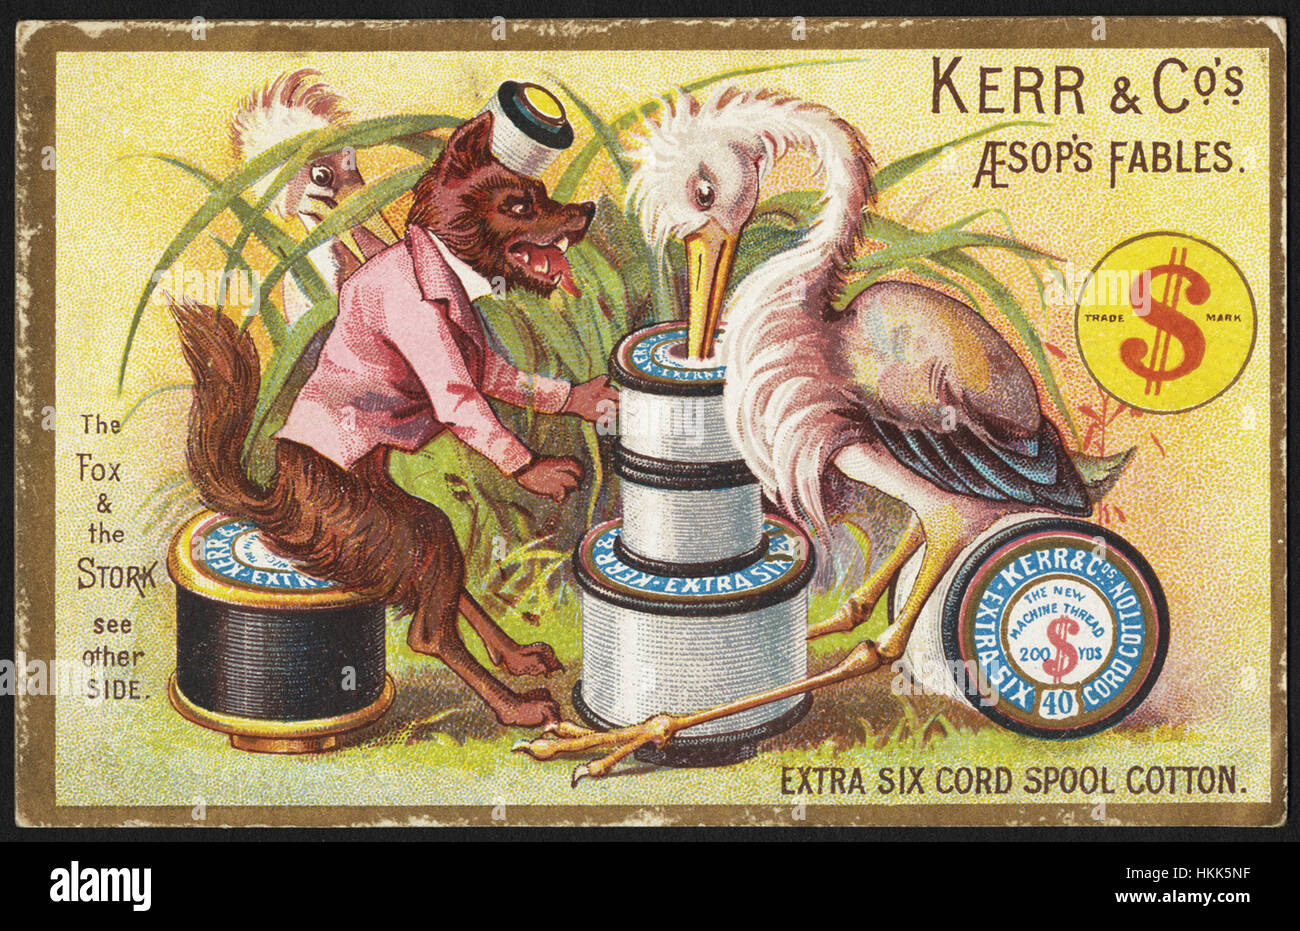 Kerr & Co's Aesop's fables. The fox & the stork, see other side, extra six cord spool cotton. Stock Photo